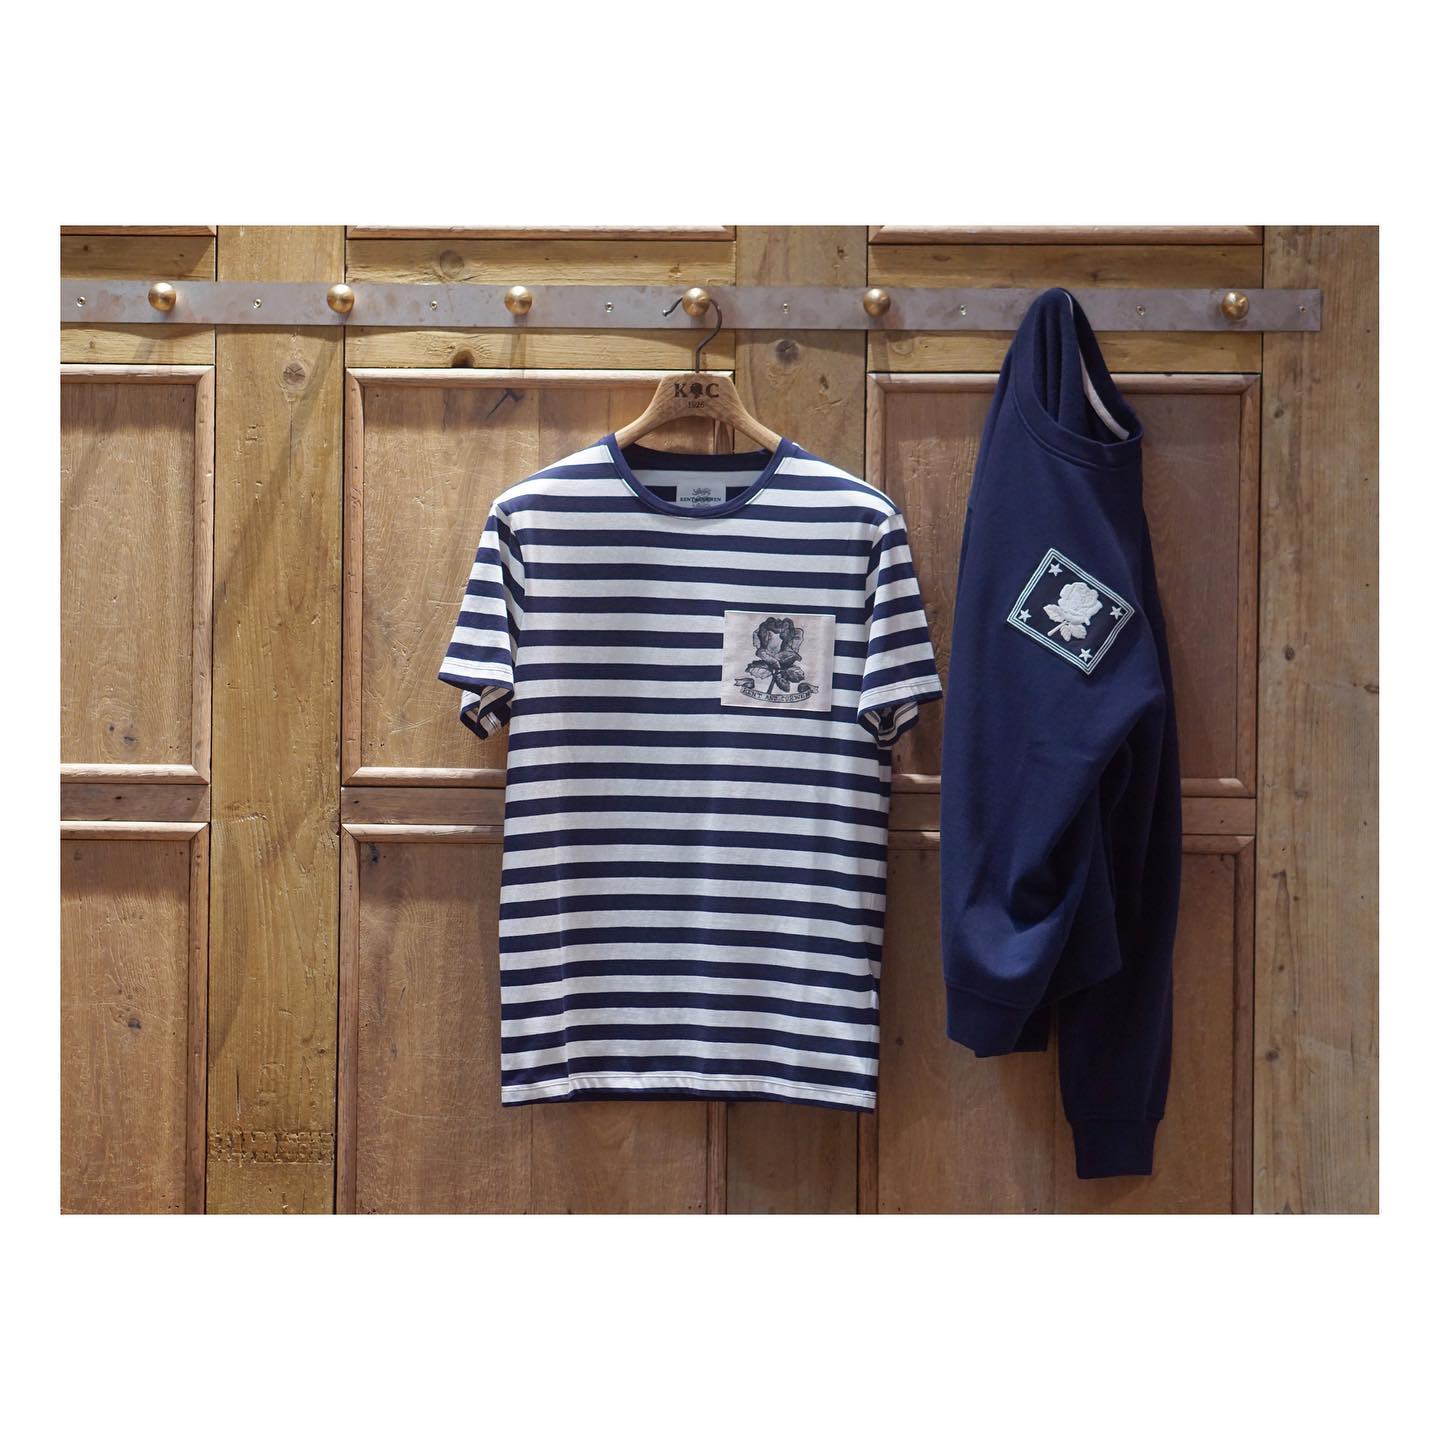 Harking to the oceans and the seas, our rose sketch patch Breton tee and navy marine patch sweatshirt available online.